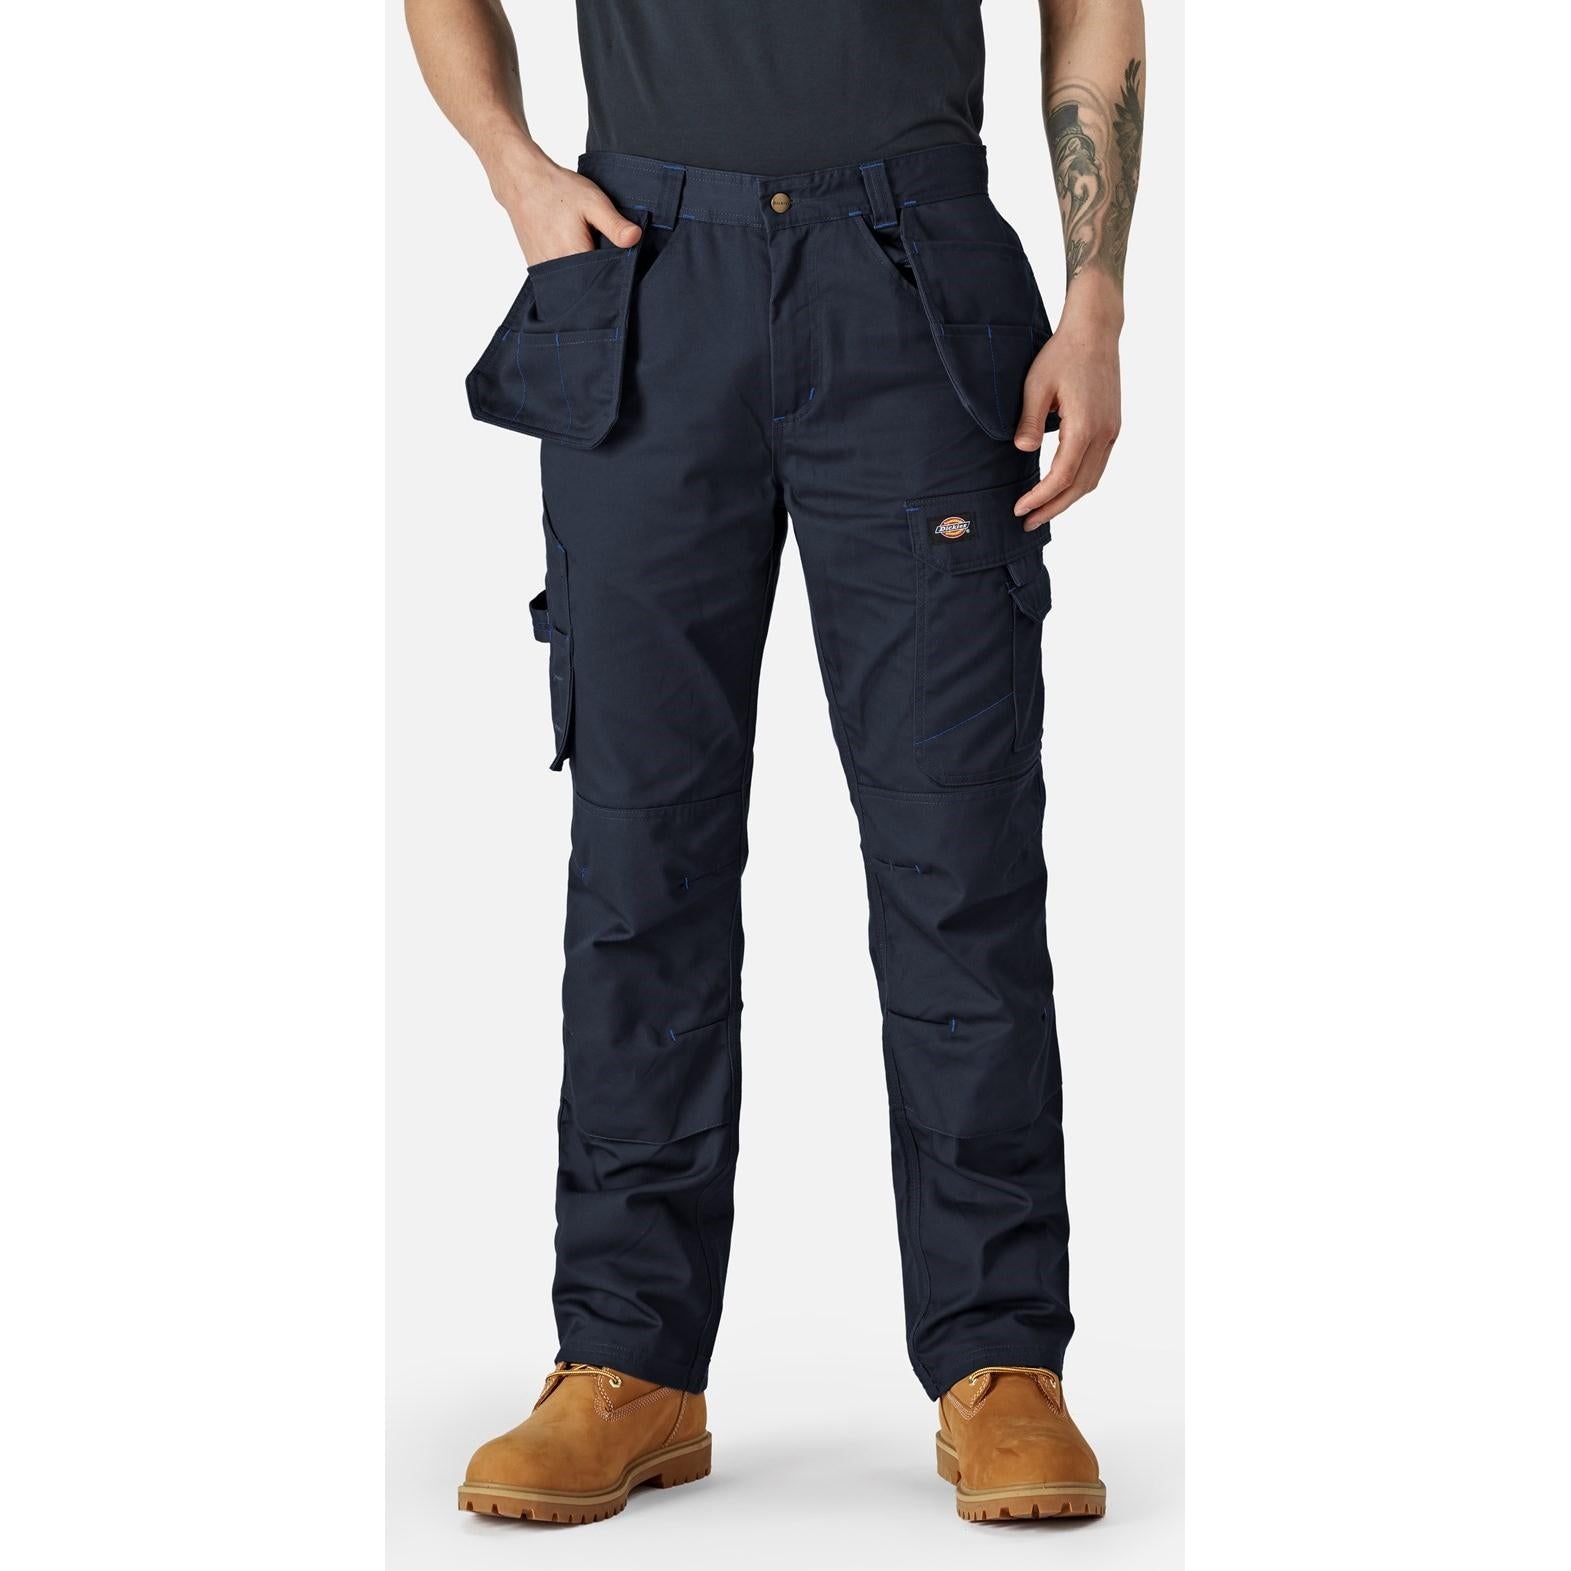 Dickies Redhawk Pro Trousers Shoes